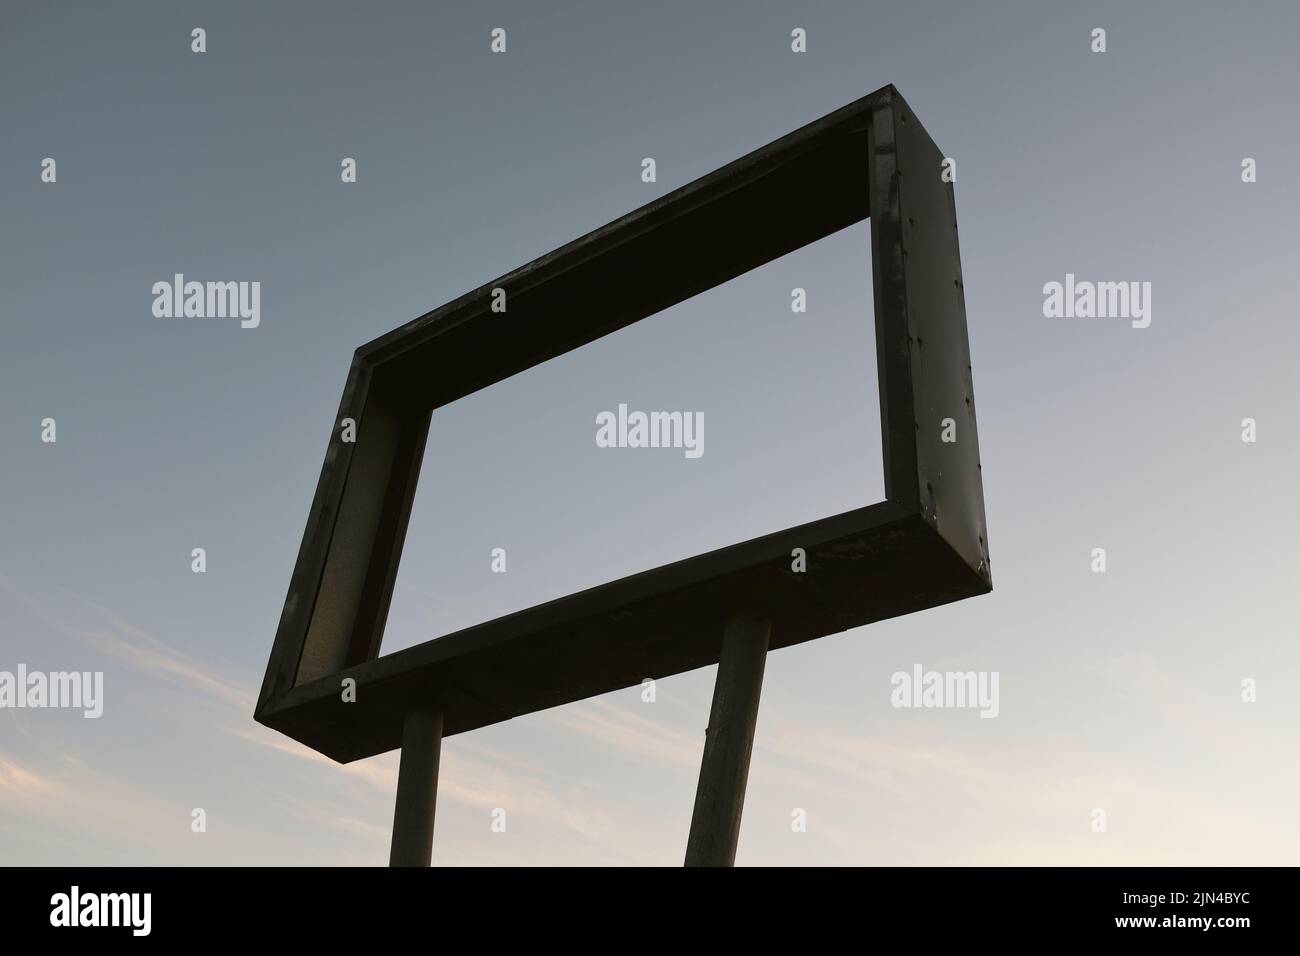 Low Angle View of Old Metal Sign Frame with No Message against dusky Sky Stock Photo